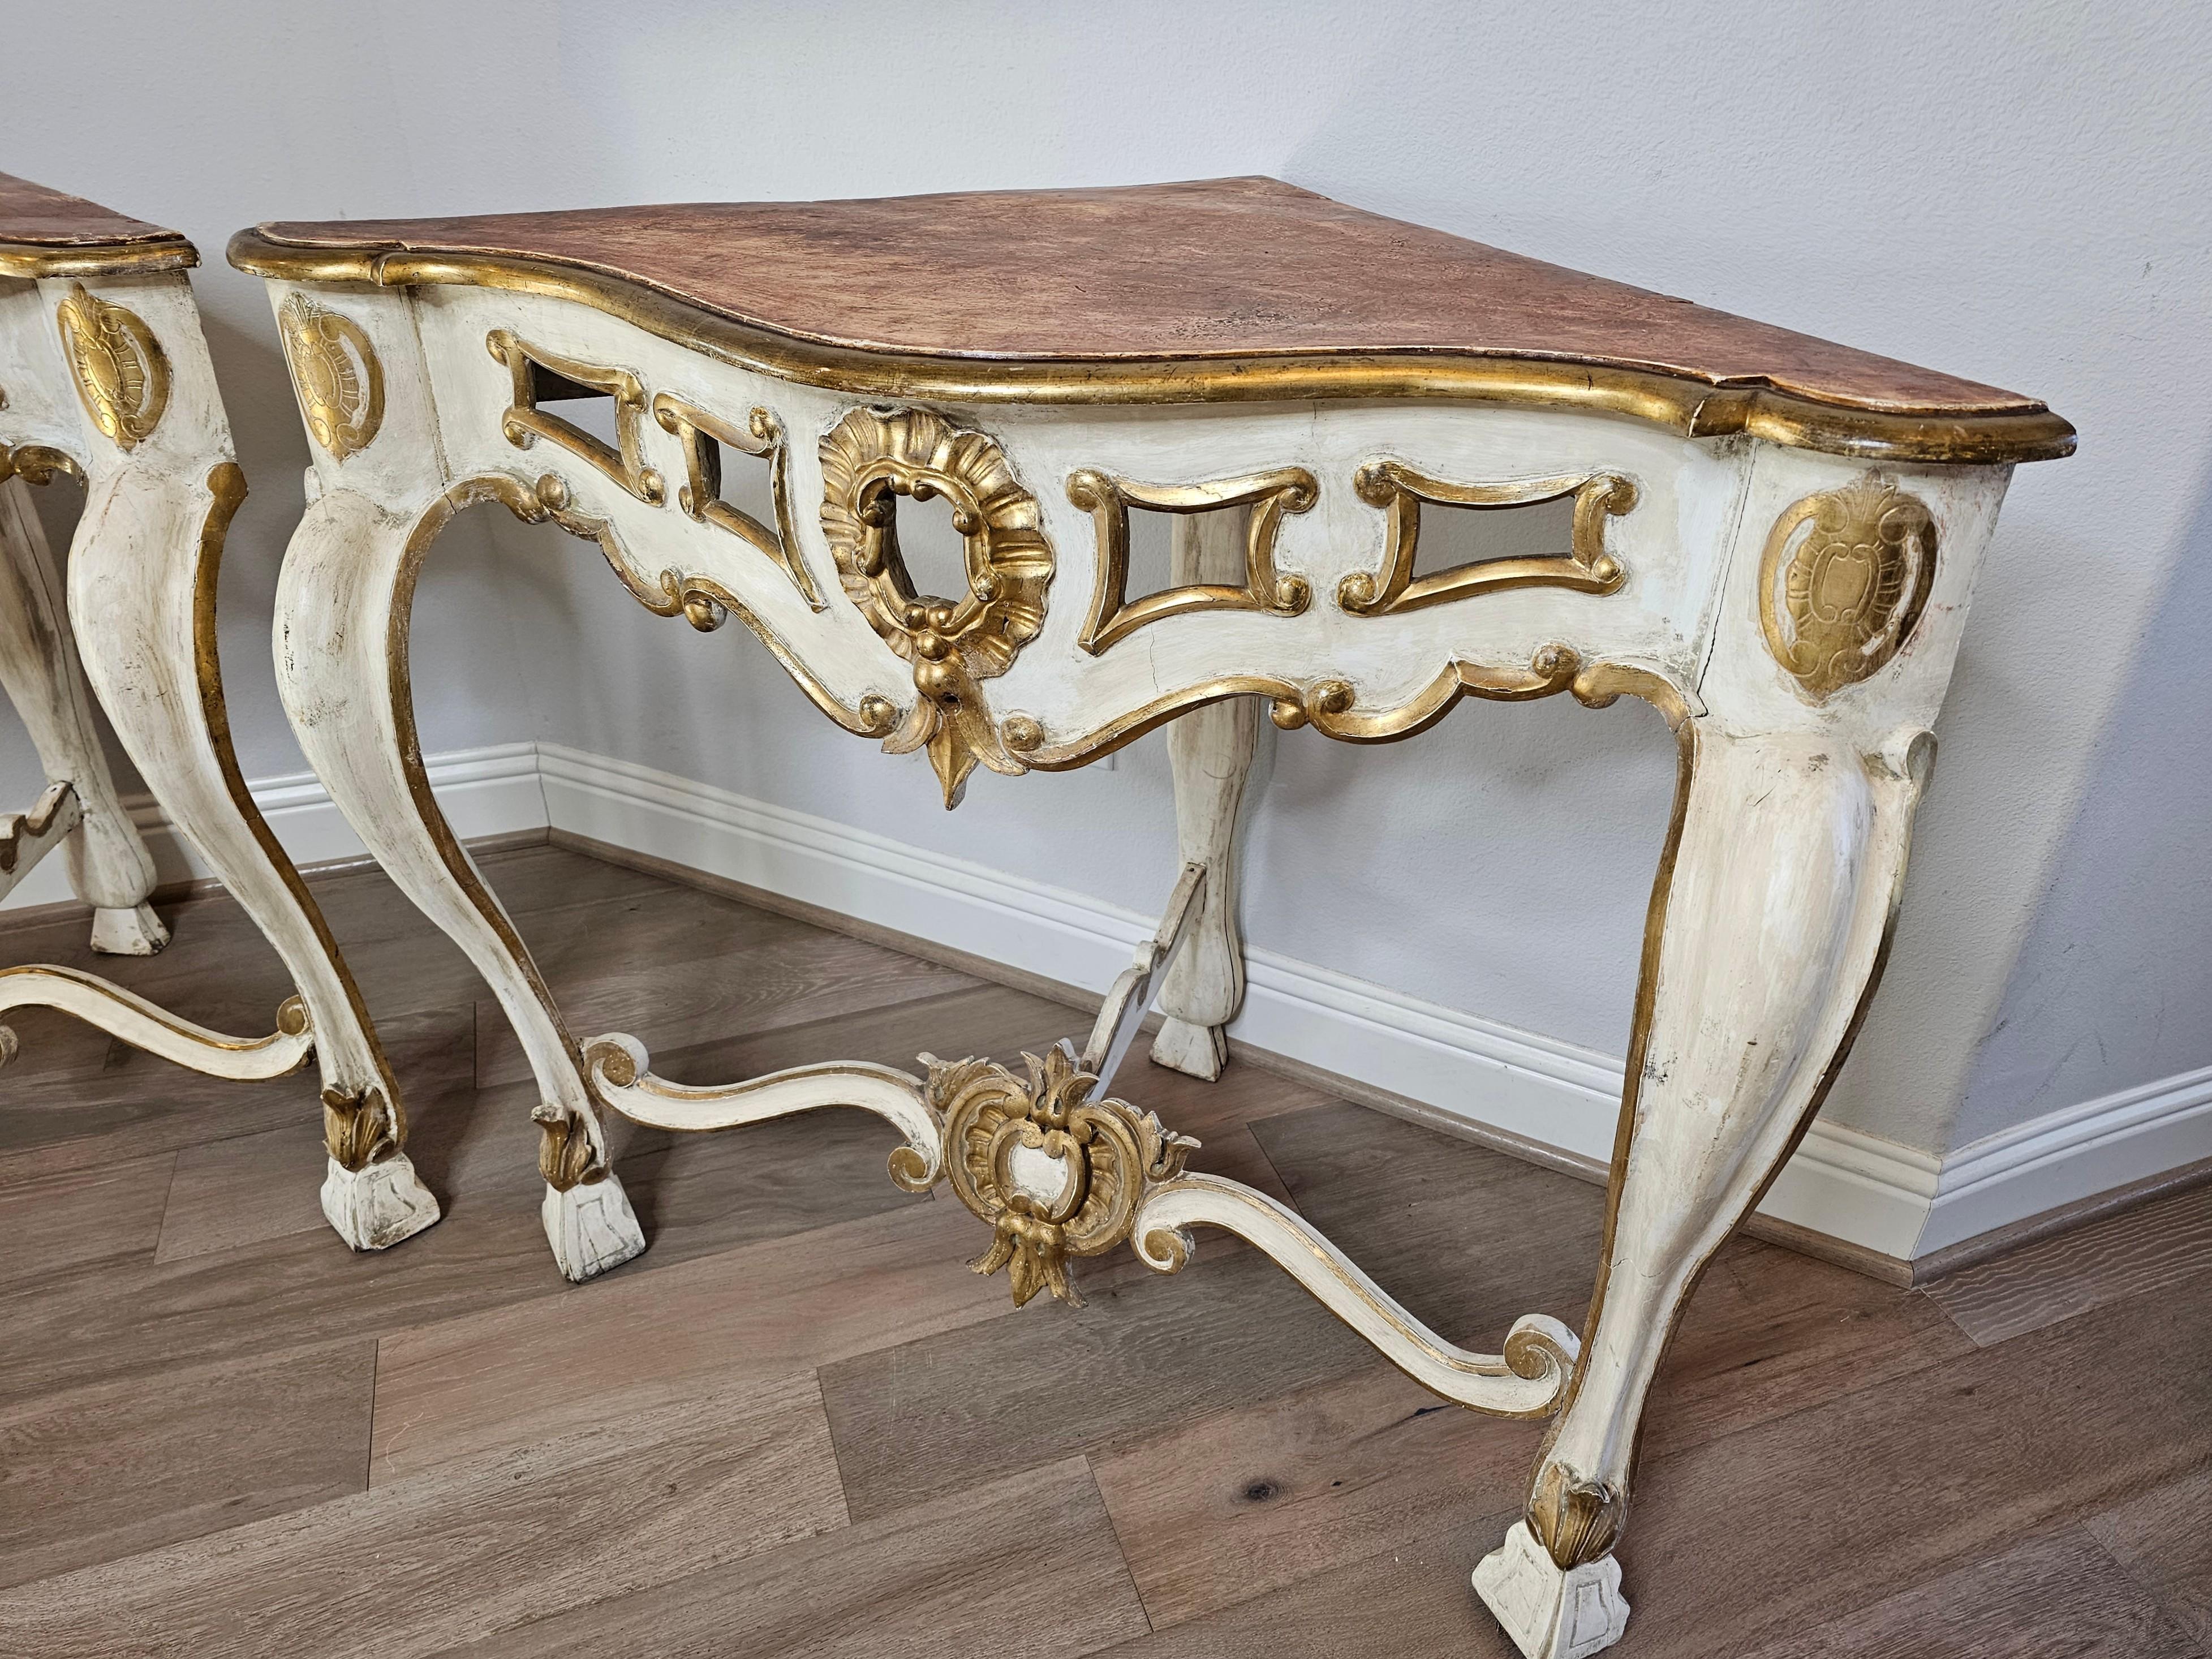 18th Century Italian Louis XV Carved Painted Gilt Wood Corner Console Table Pair For Sale 3